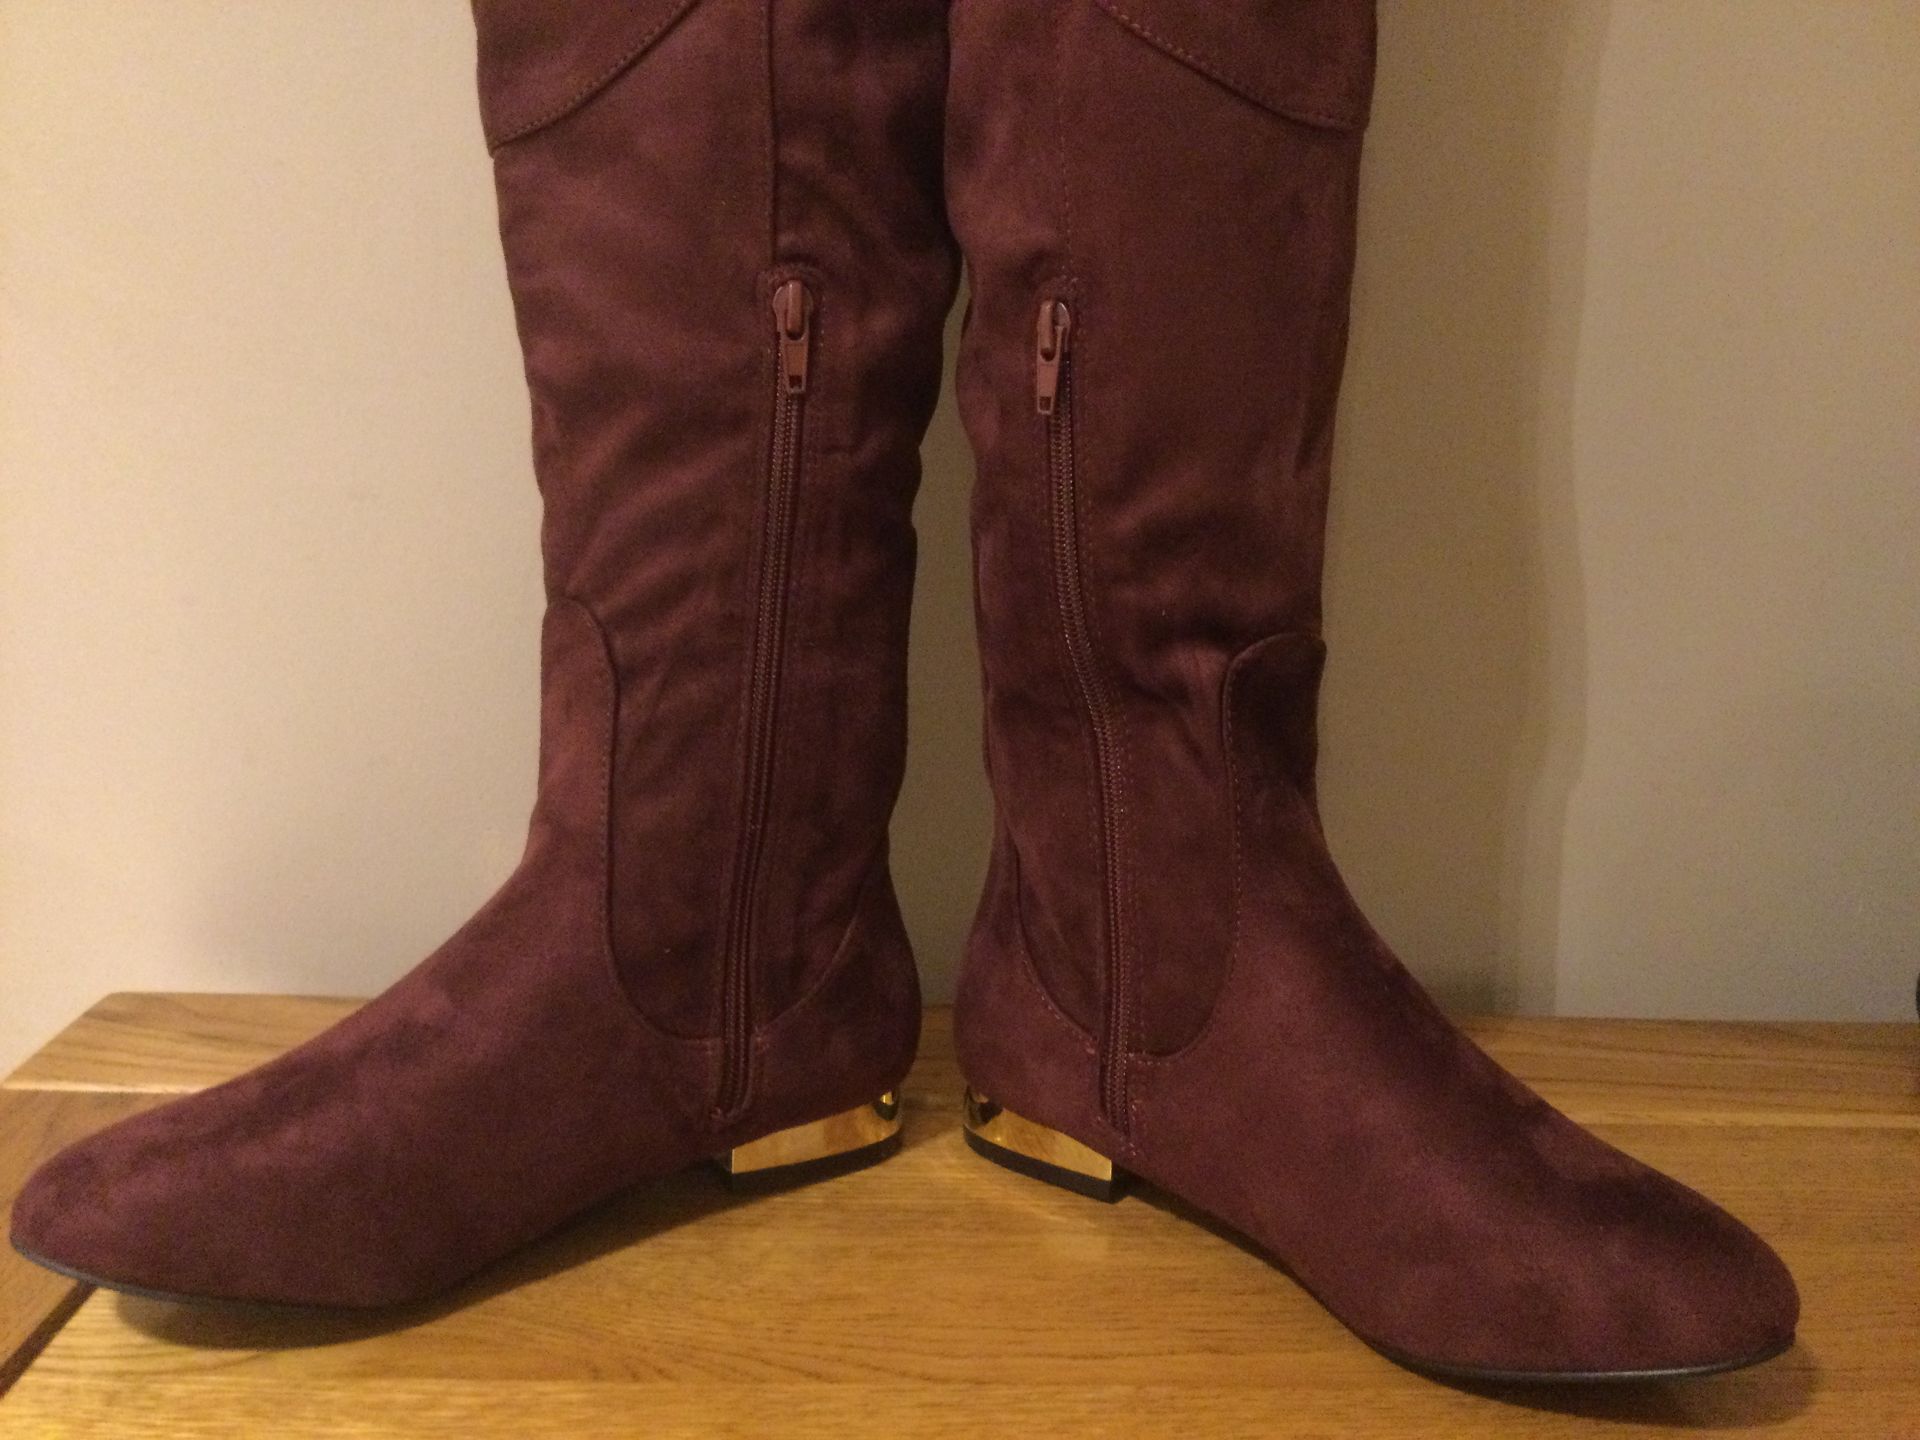 Dolcis “Katie” Long Boots, Low Heel, Size 5, Burgundy - New RRP £55.00 - Image 4 of 7